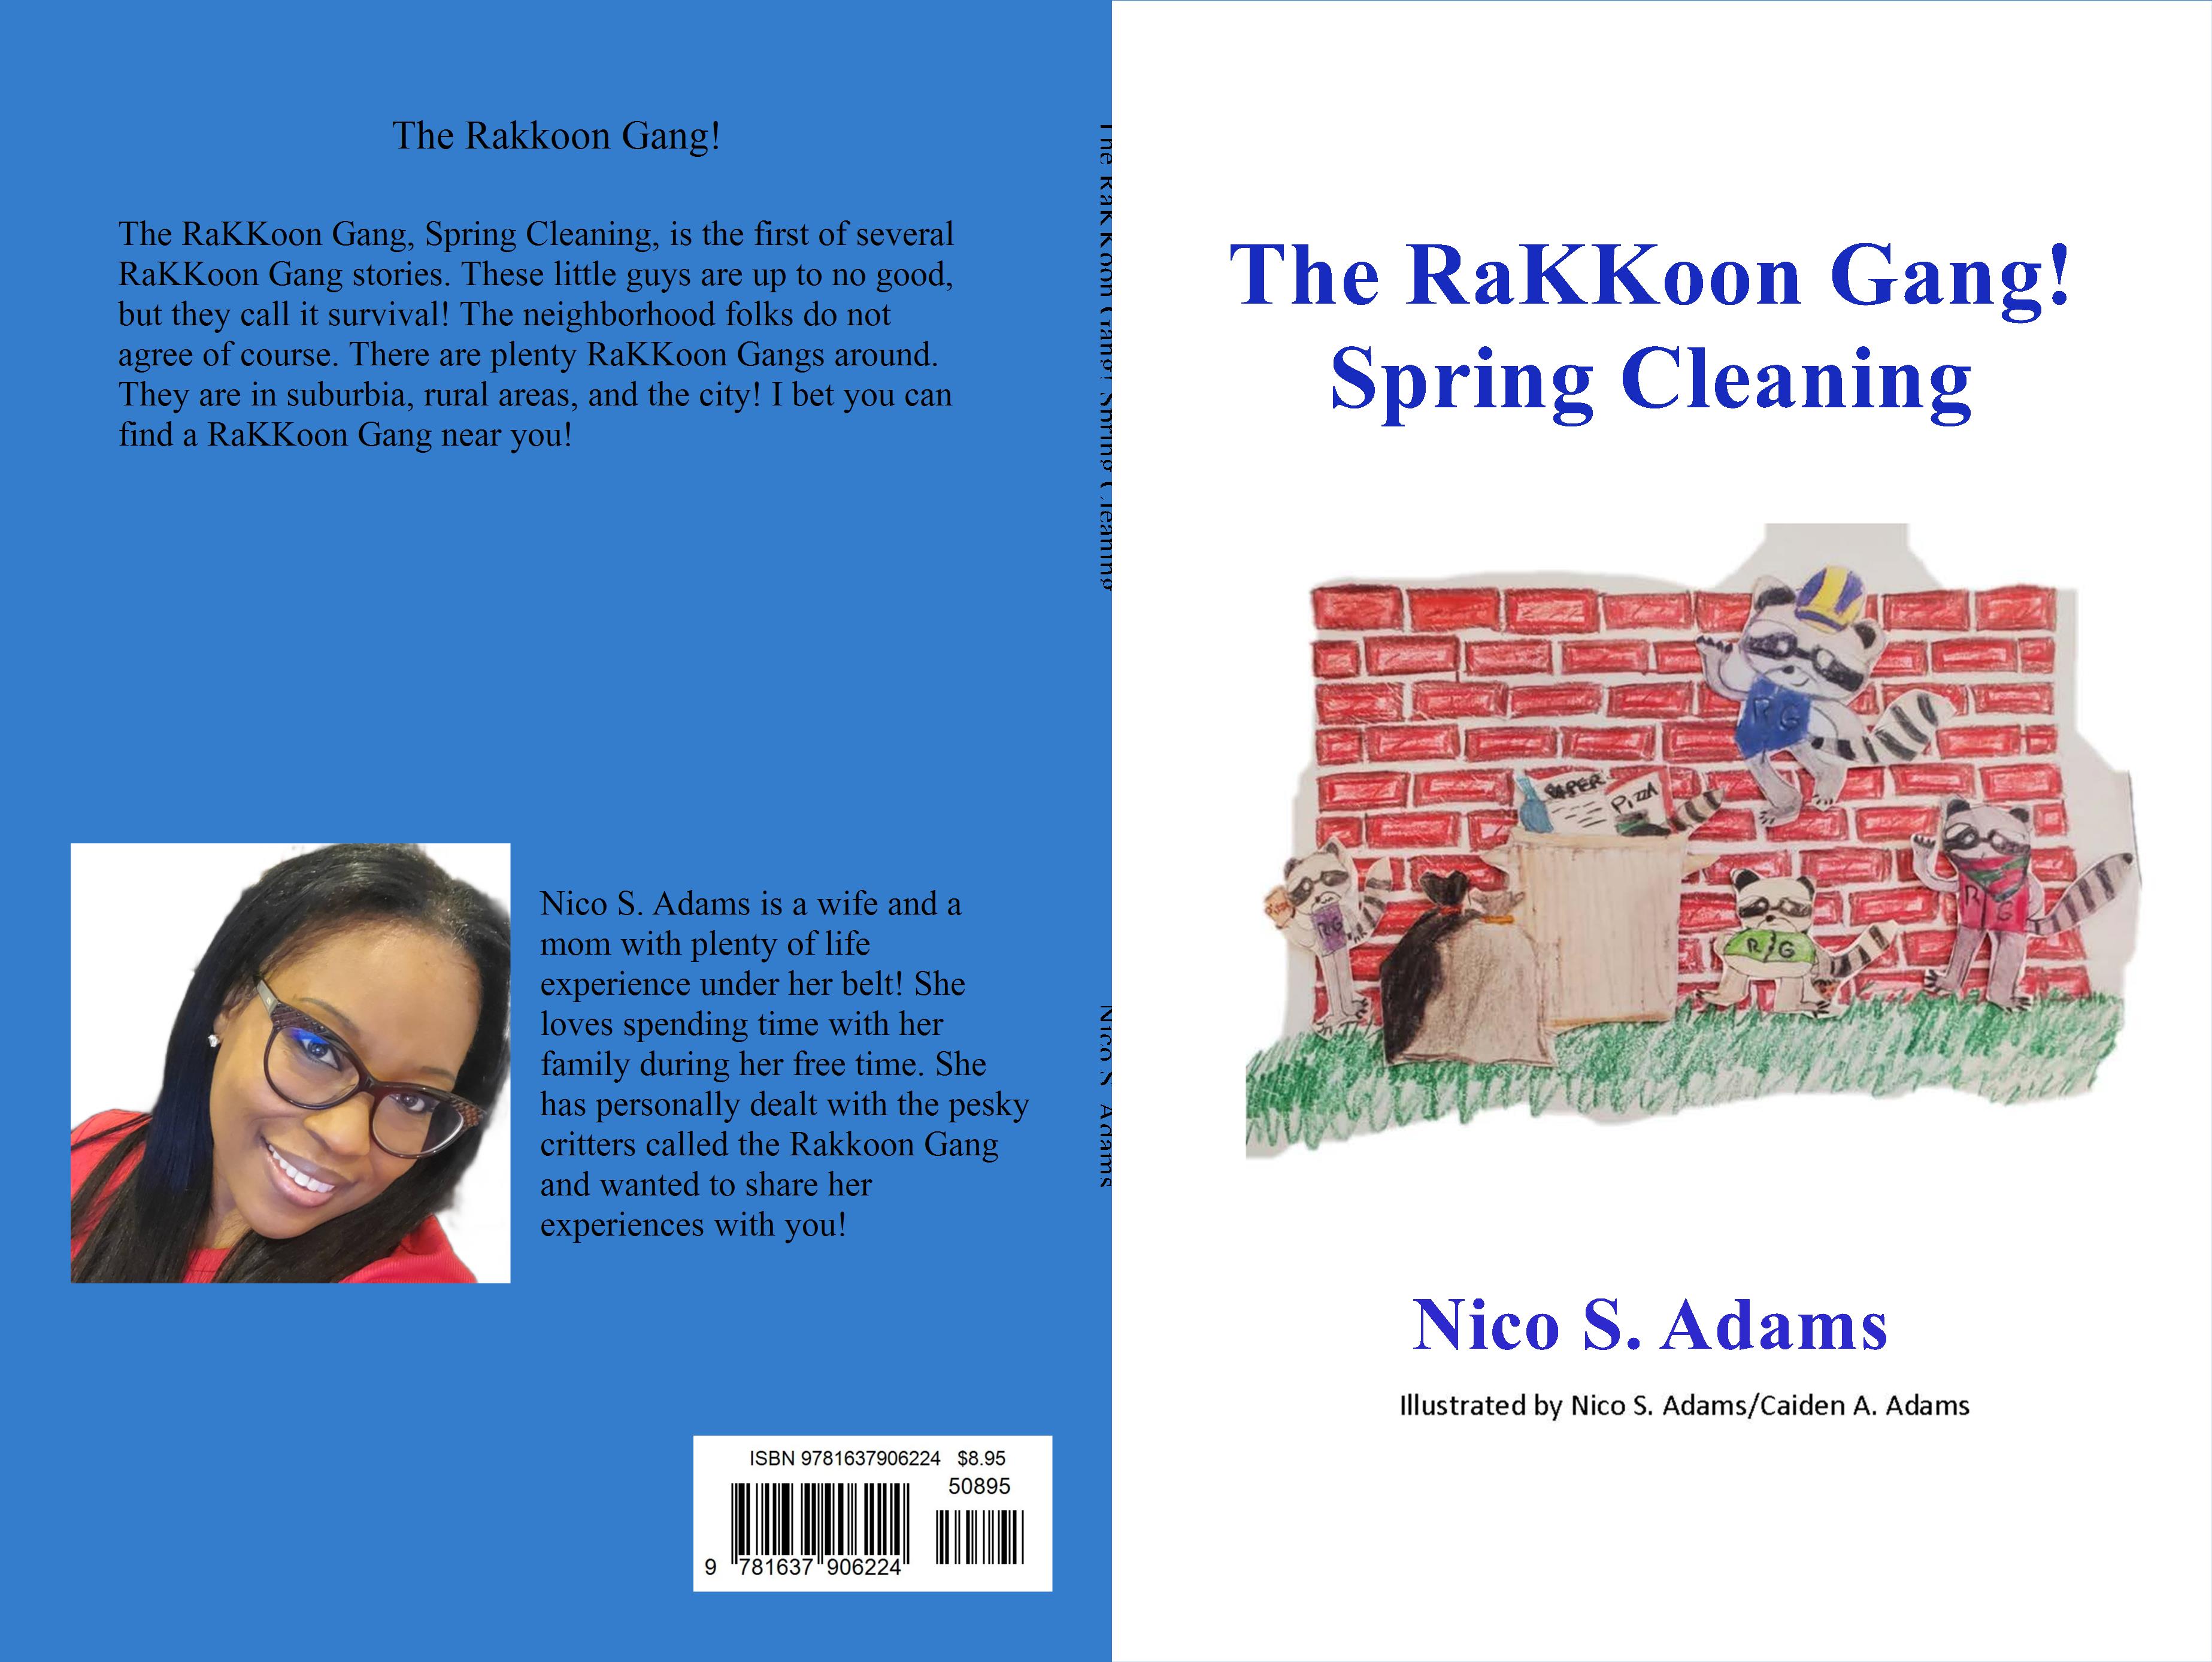 The RaKKoon Gang! Spring Cleaning cover image